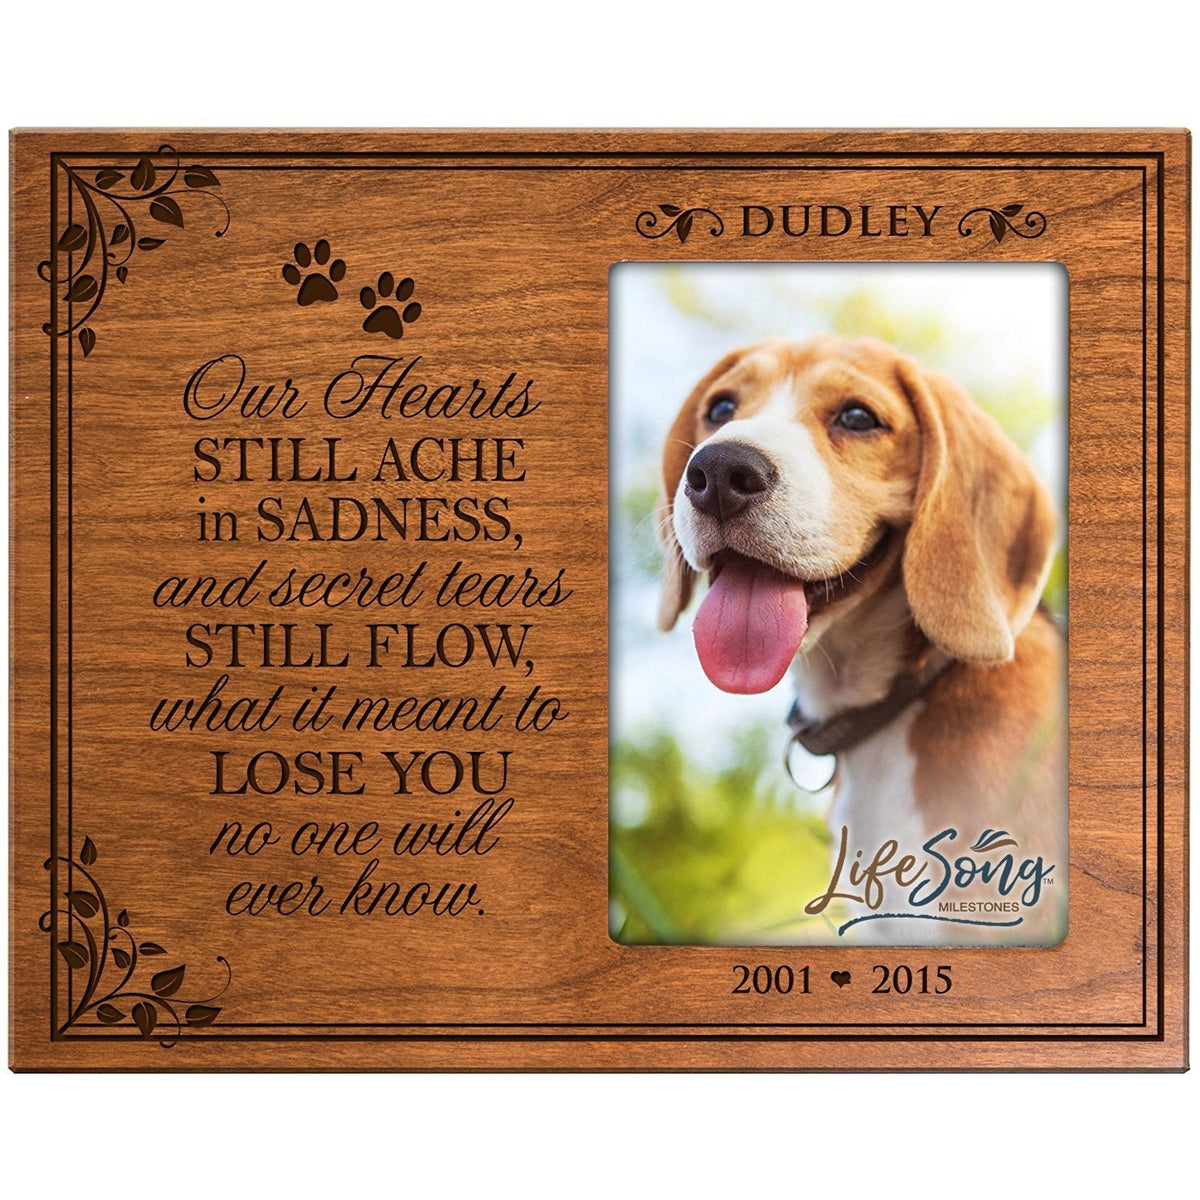 Pet Memorial Picture Frame - Our Hearts Still Ache - LifeSong Milestones